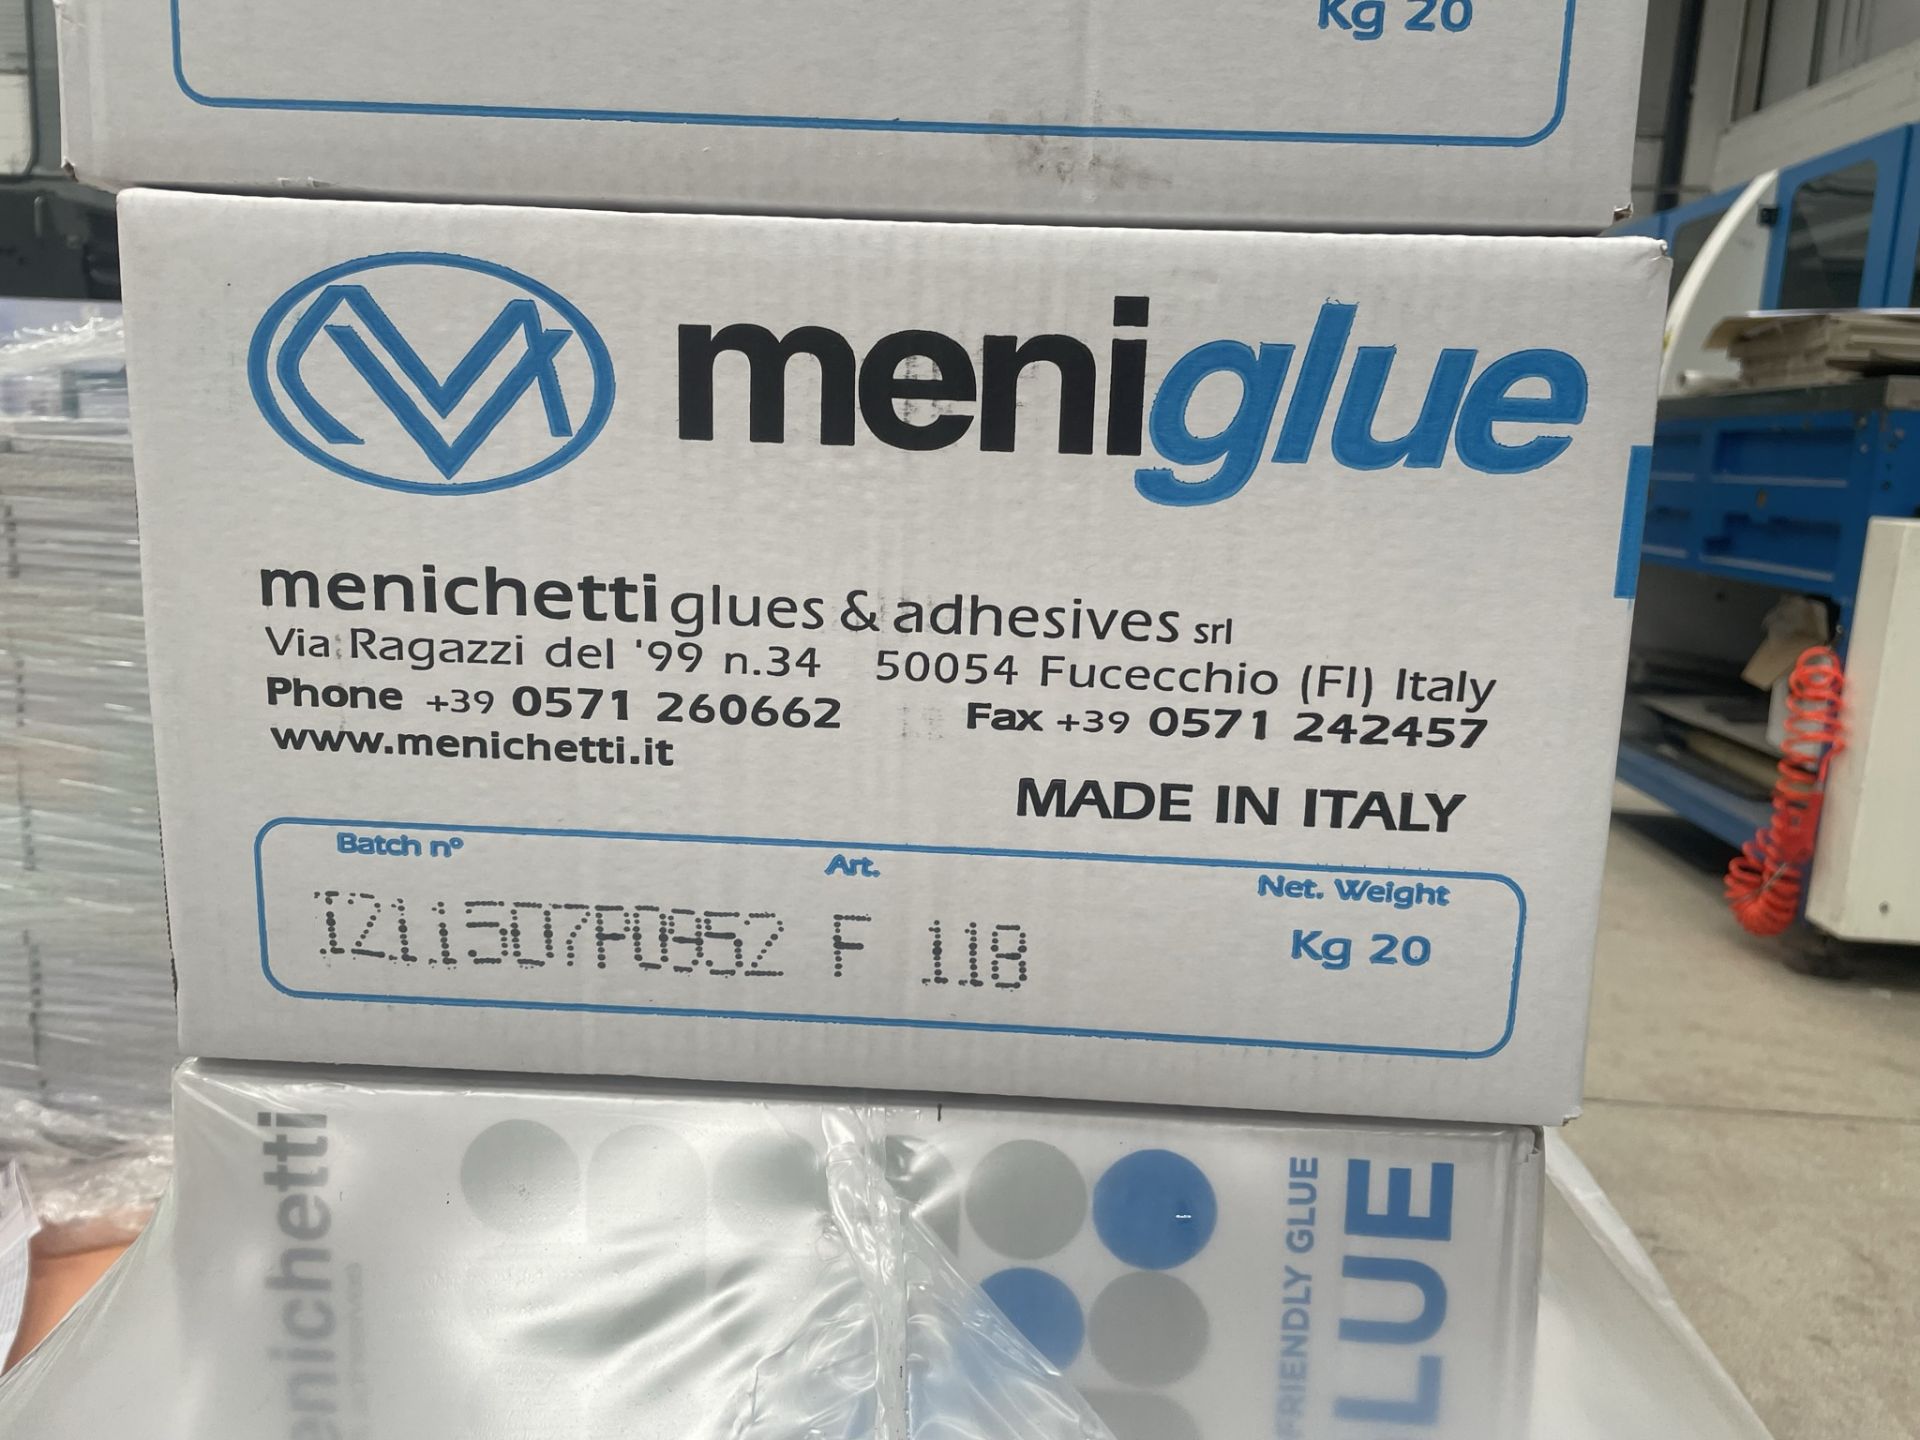 10 x Boxes of MeniGlue 20kg F118 Packs of Adhesive Jelly Glue - Image 2 of 3